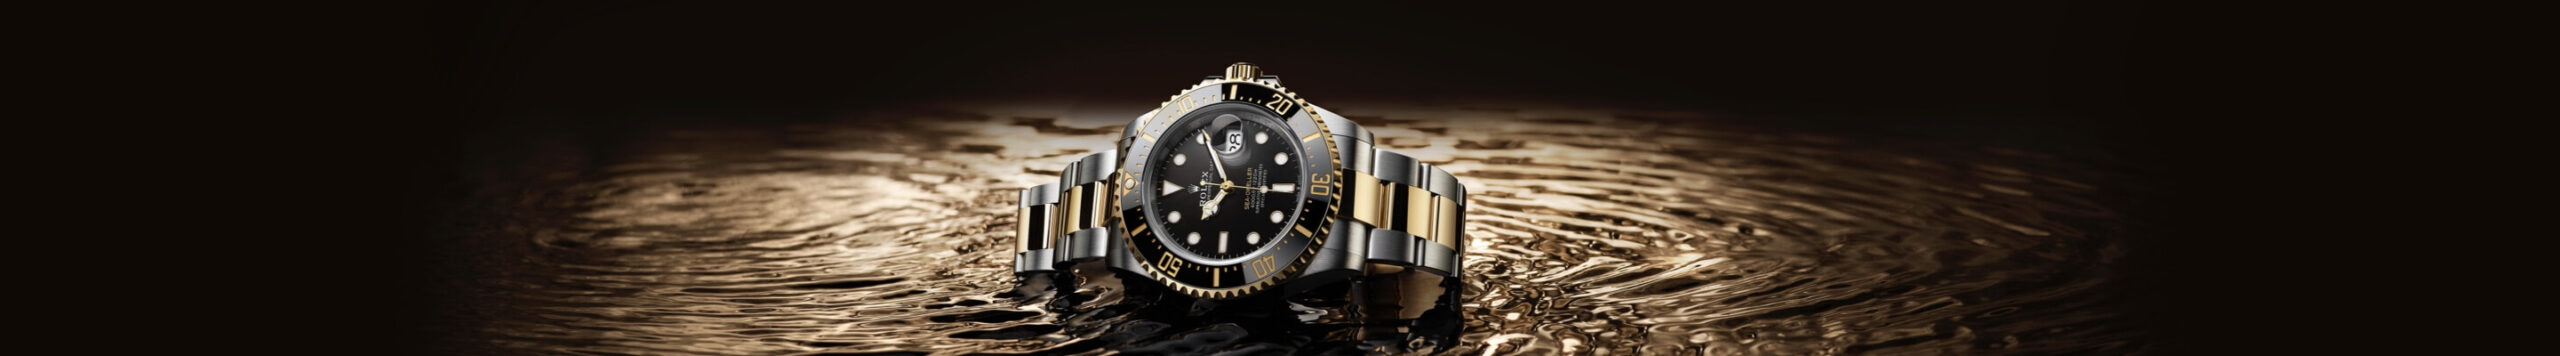 Luxury watch on a reflective water surface with ripples, highlighted by a spotlight against a dark background.